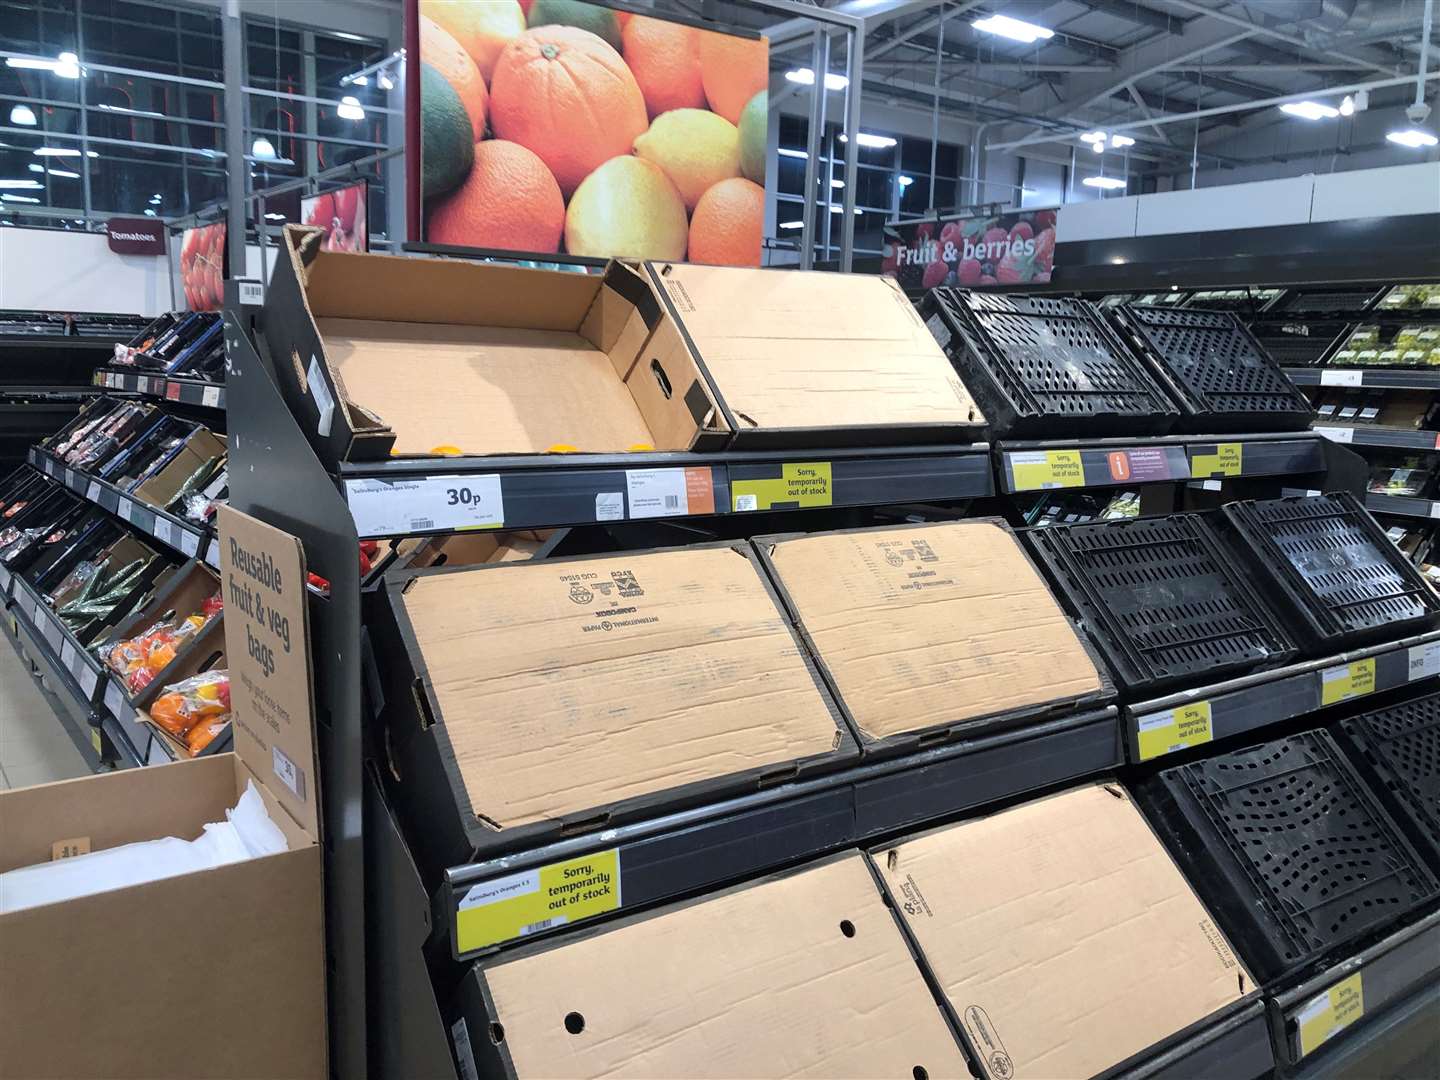 Supermarkets in Northern Ireland have already encountered supply issues (Michael McHugh/PA)